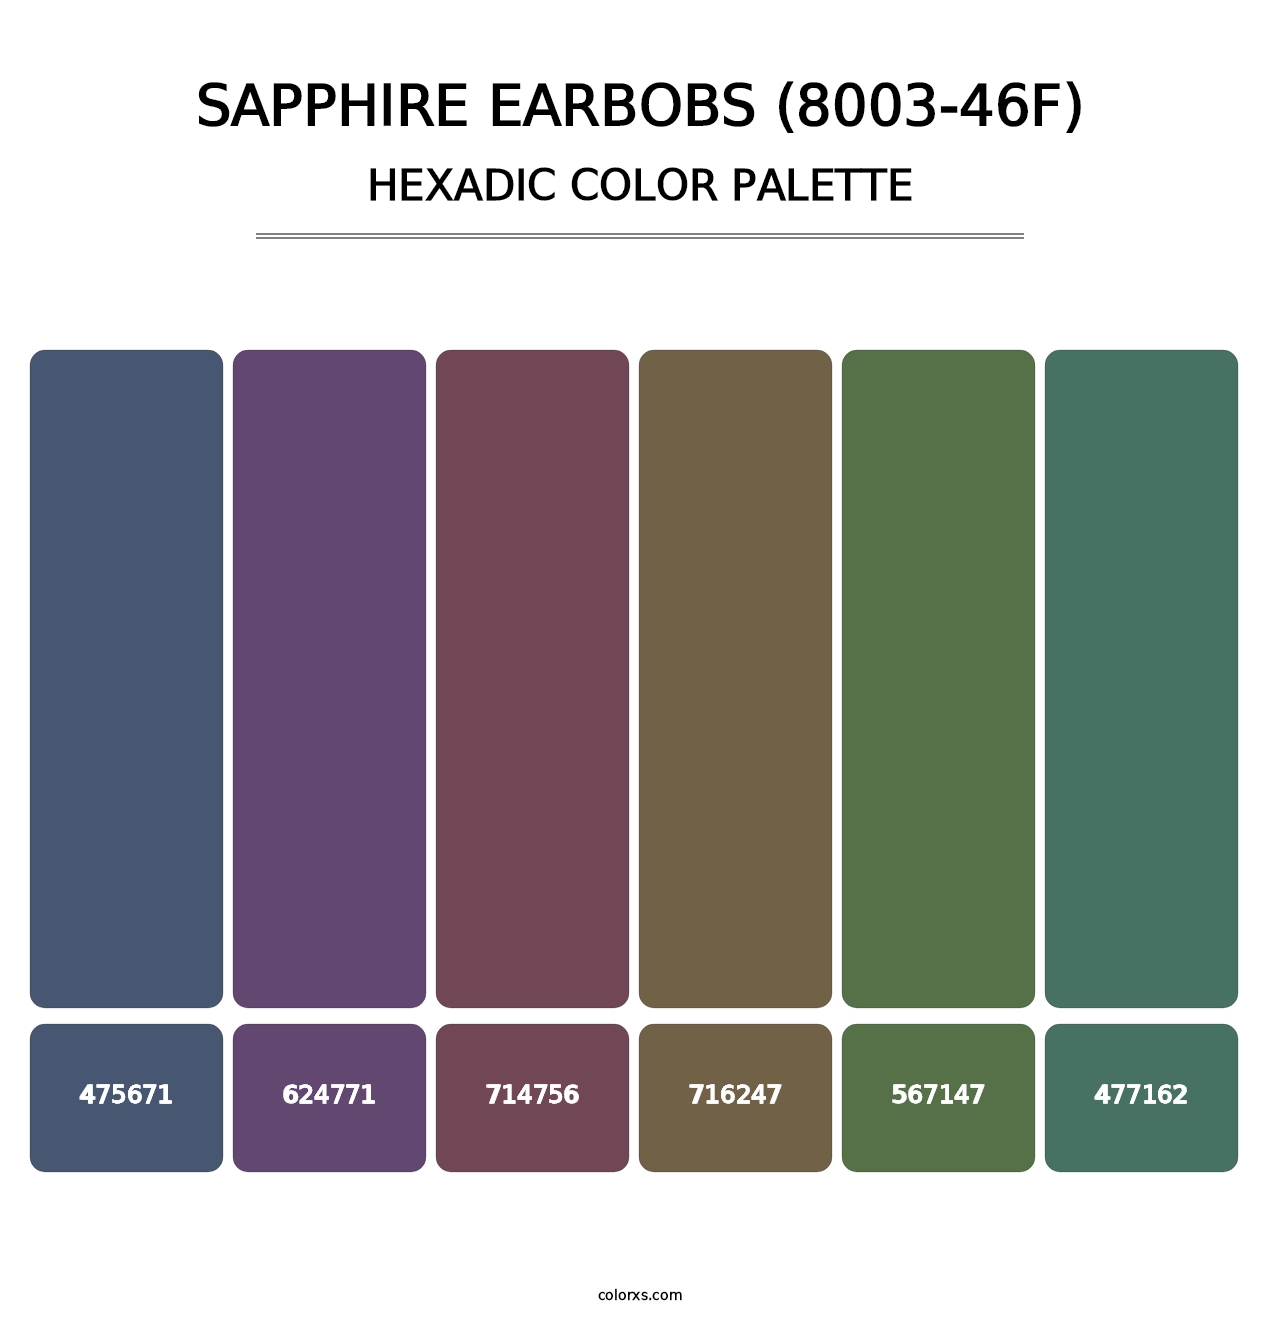 Sapphire Earbobs (8003-46F) - Hexadic Color Palette